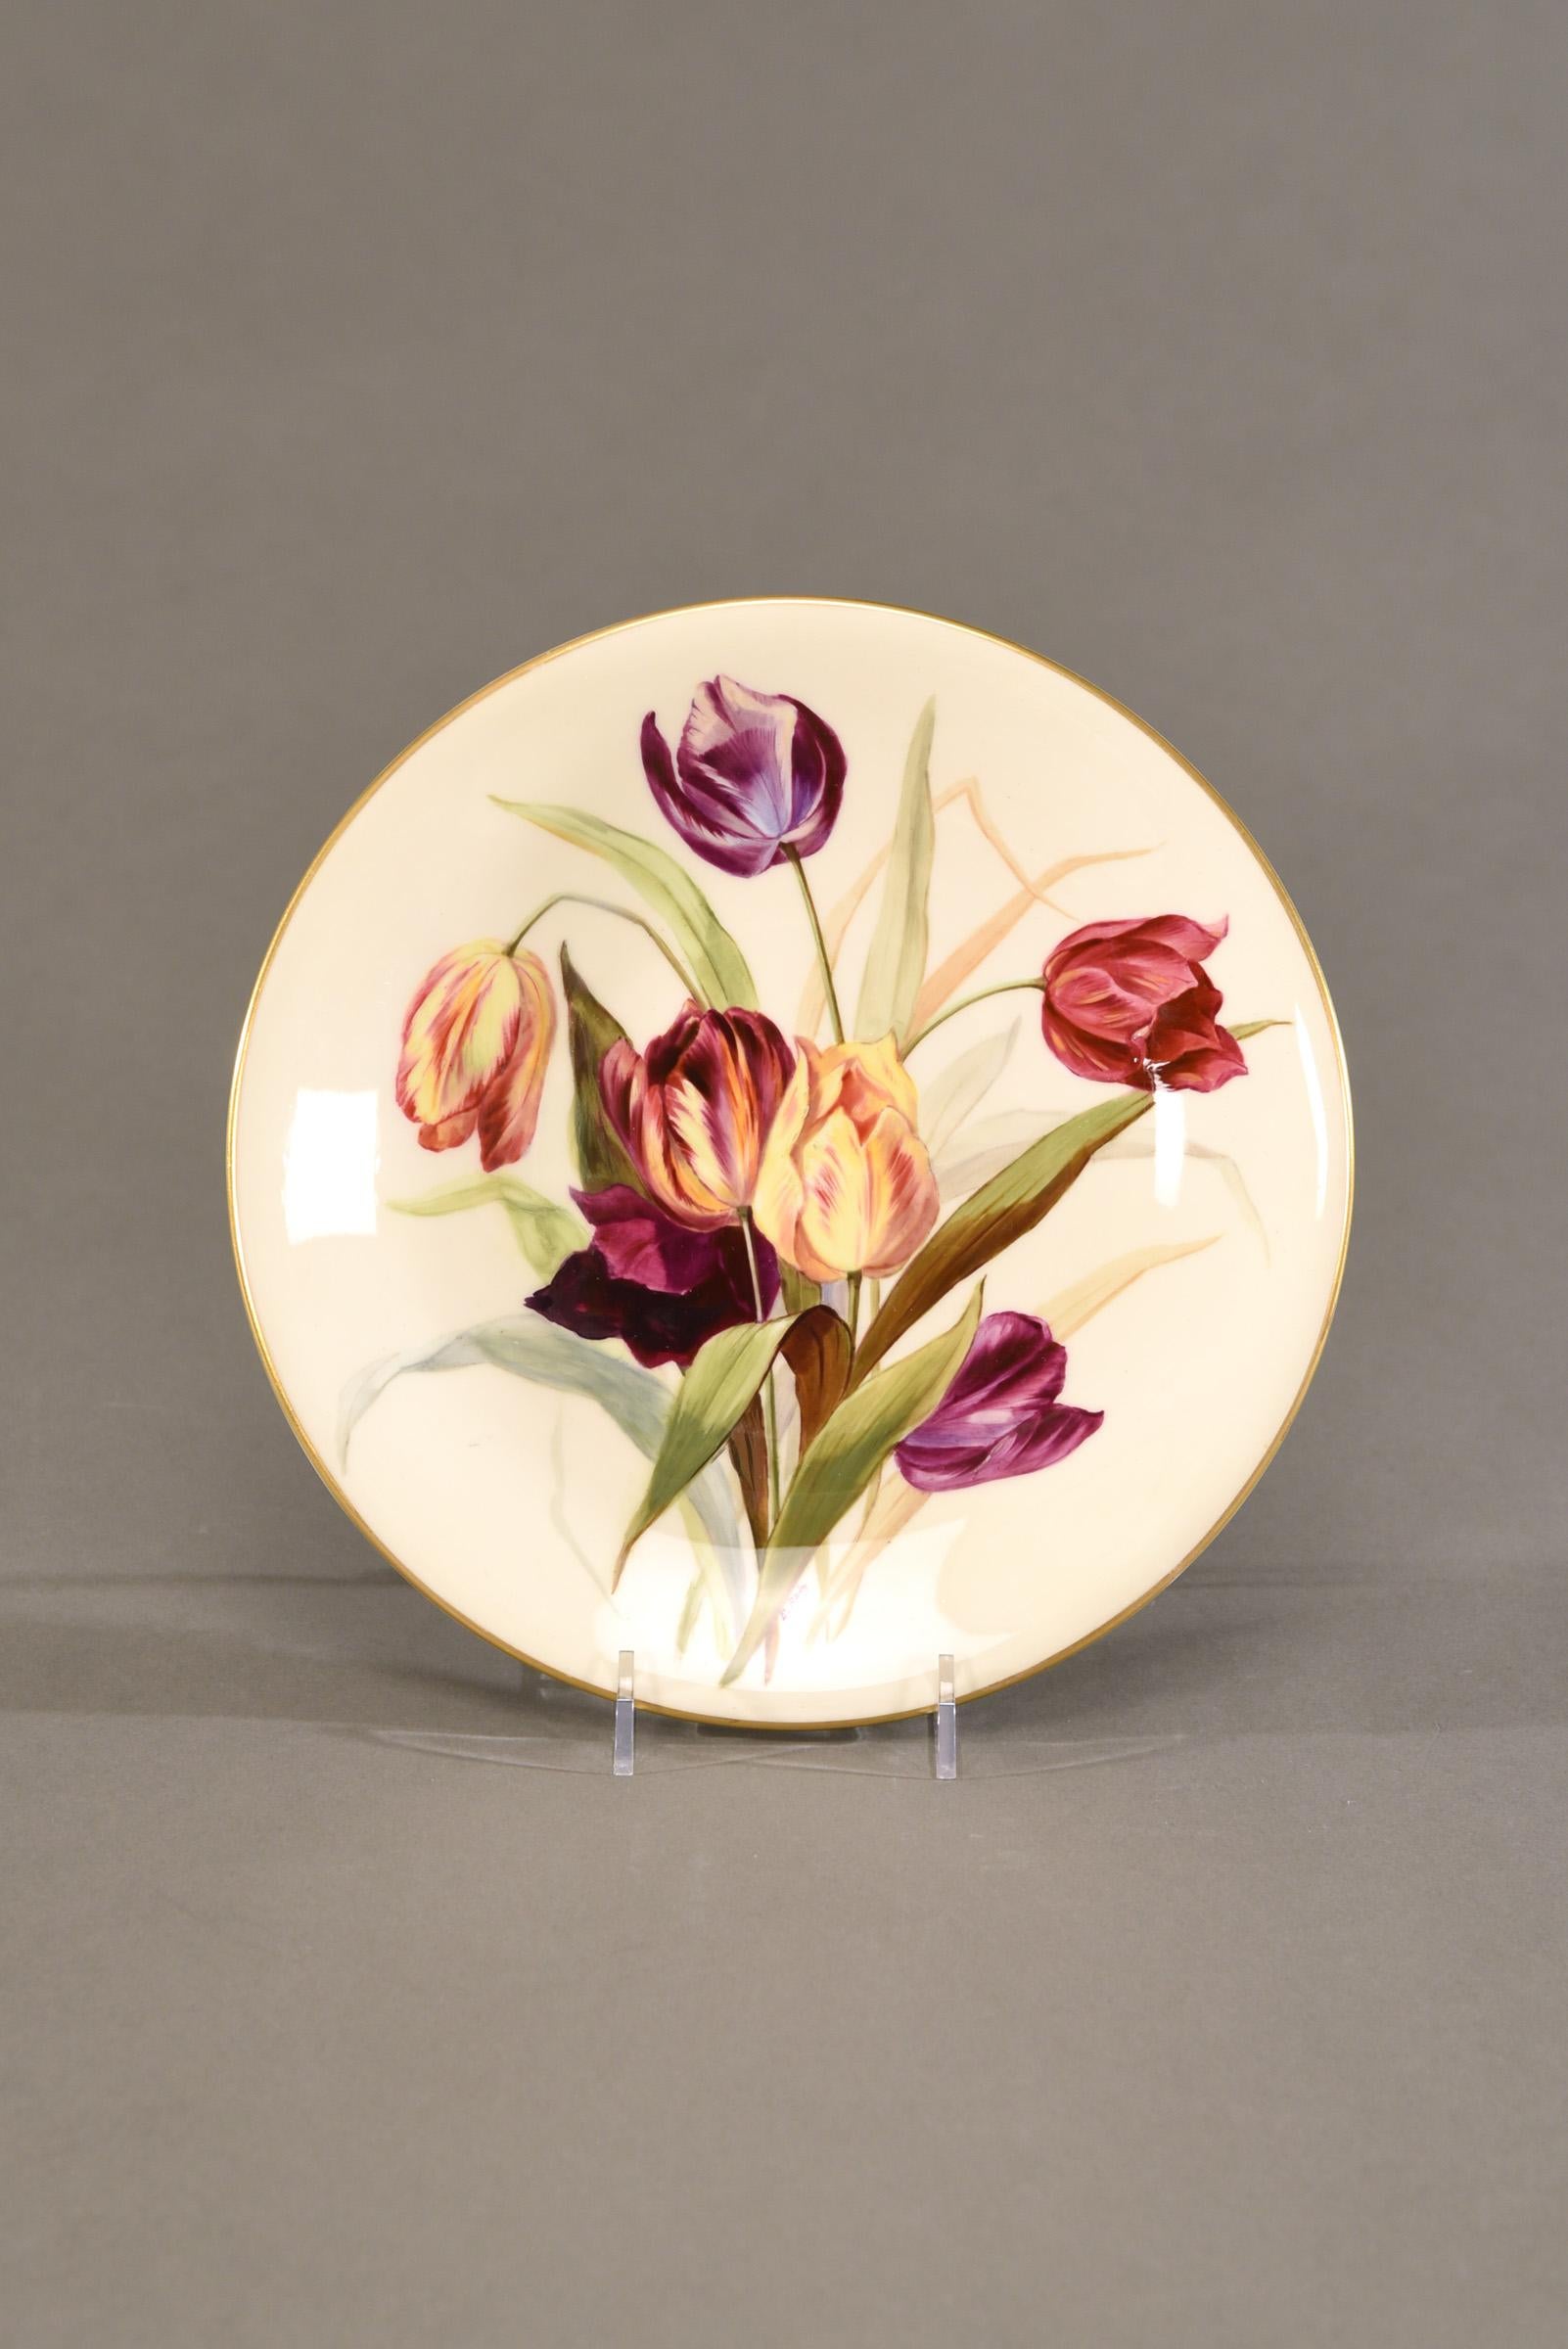 This is a rare and spectacular set of 11 19th c Royal Worcester dessert cabinet plates, hand painted and signed by the renowned Edward Raby. He was considered one of the premier artists at Royal Worcester and interpreted his subjects in the